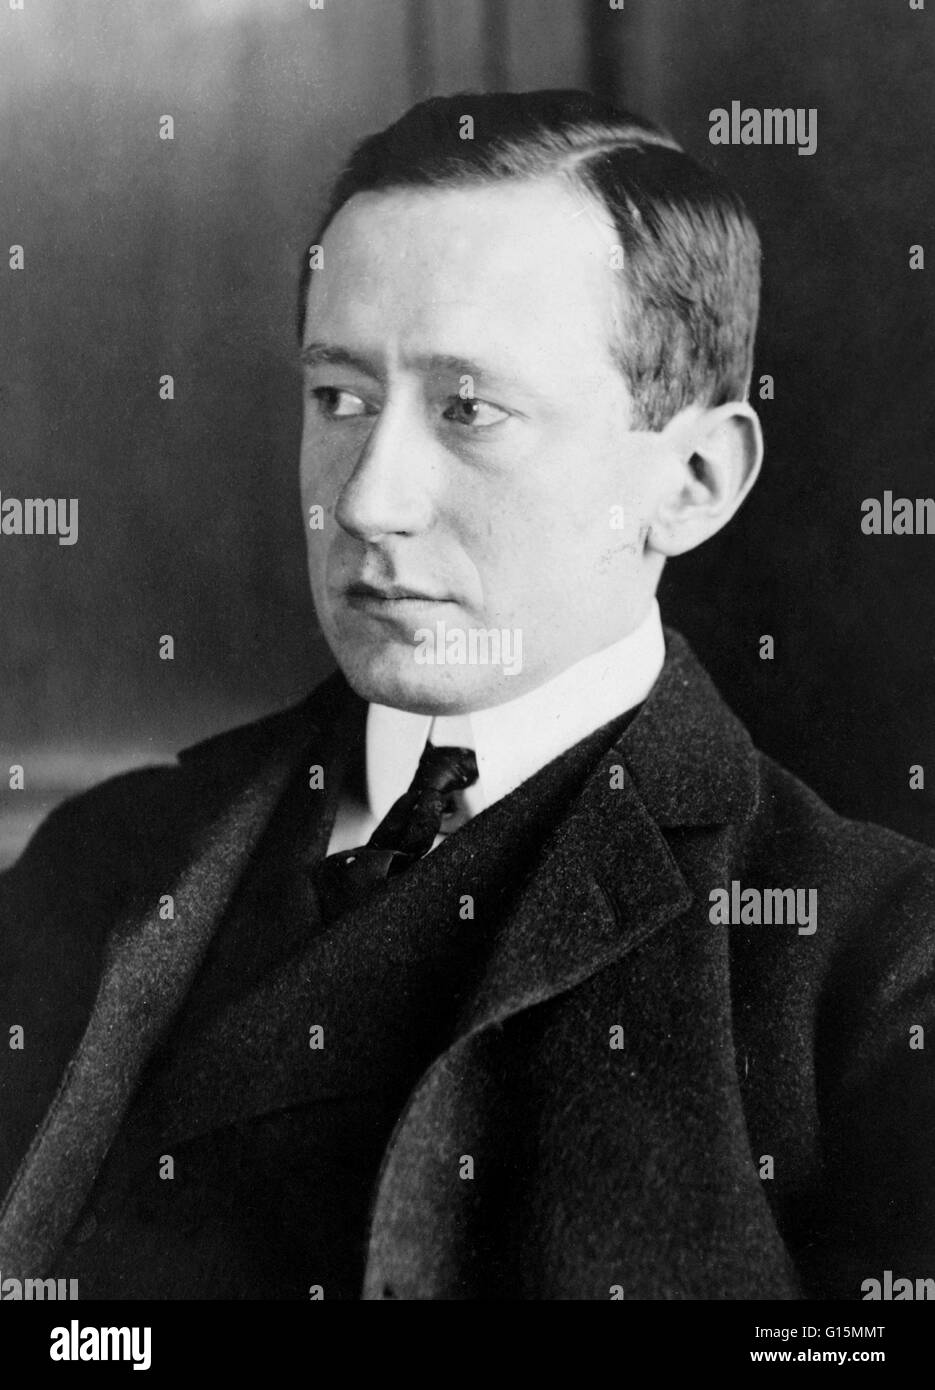 Guglielmo Marconi (April 25, 1874 - July 20 1937) was an Italian inventor,  known as the father of long distance radio transmission and for his  development of Marconi's law and a radio